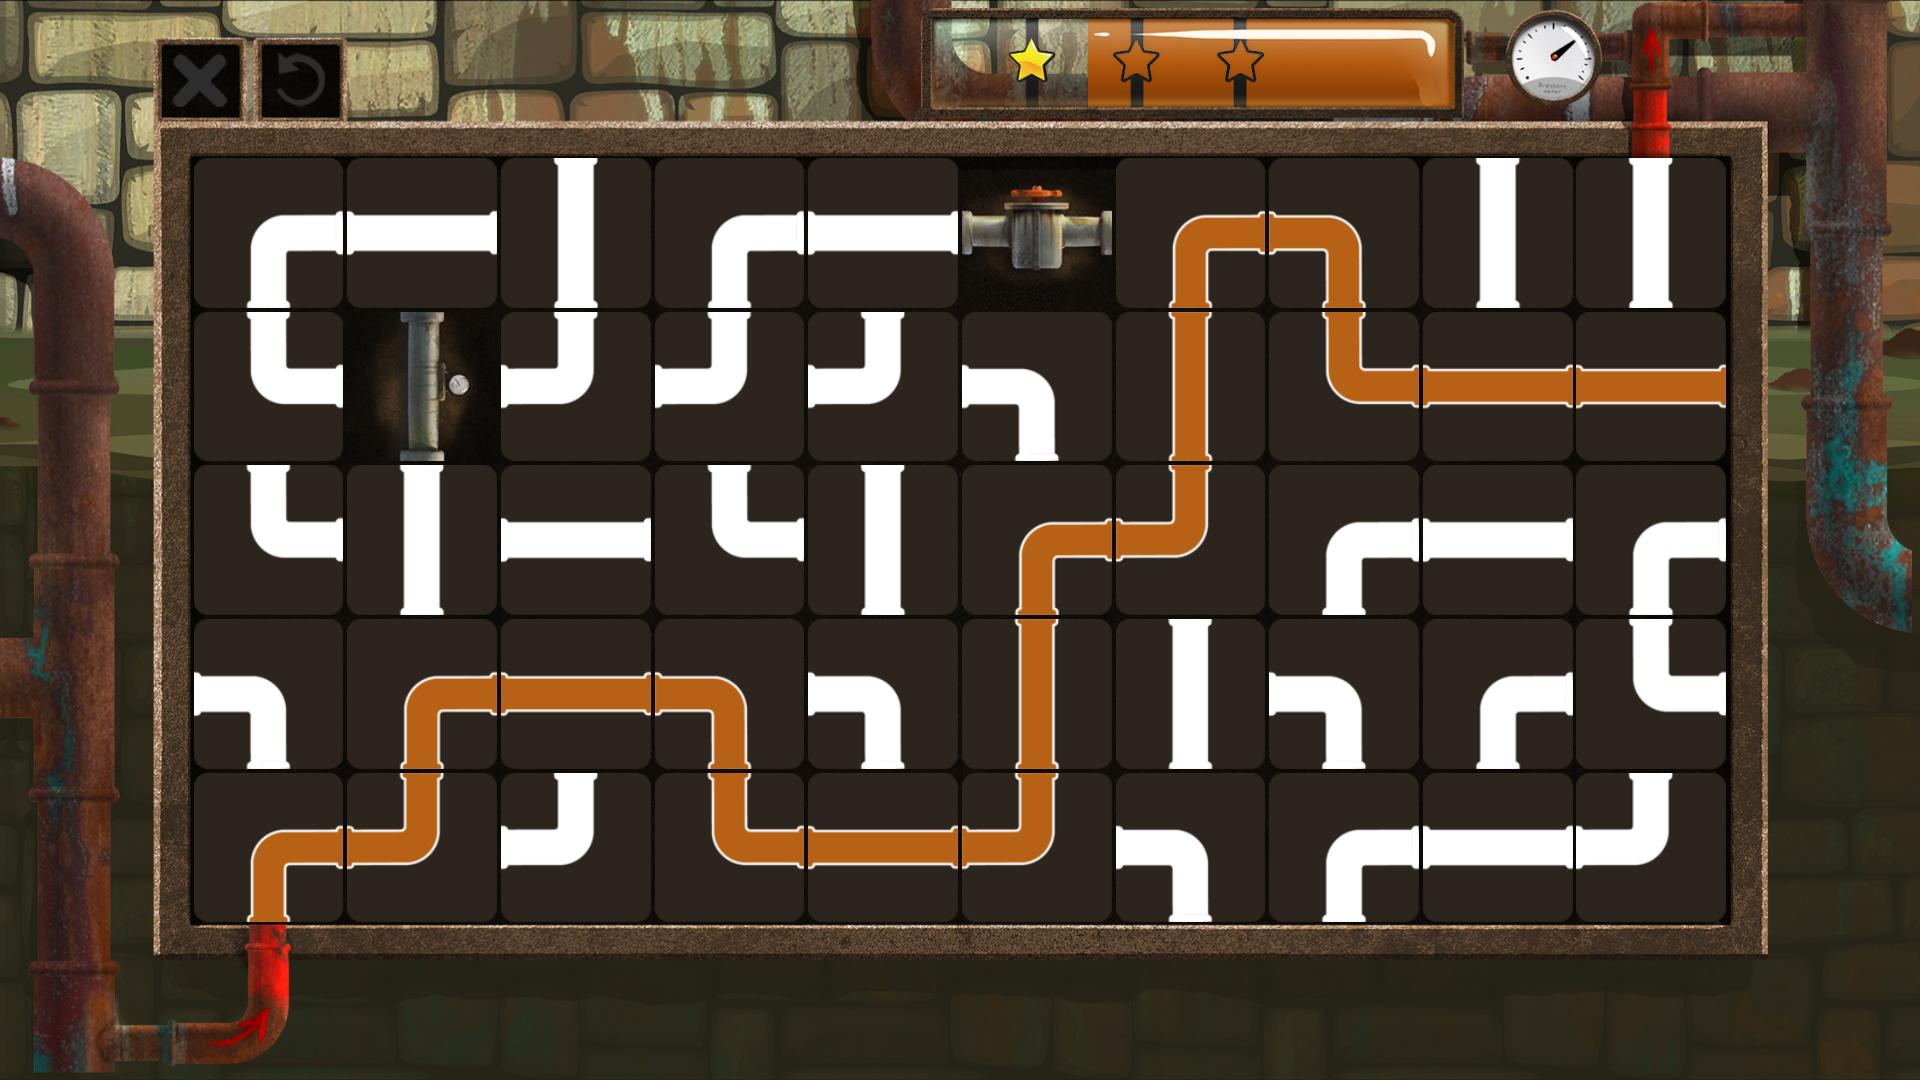 Pipes! on Steam